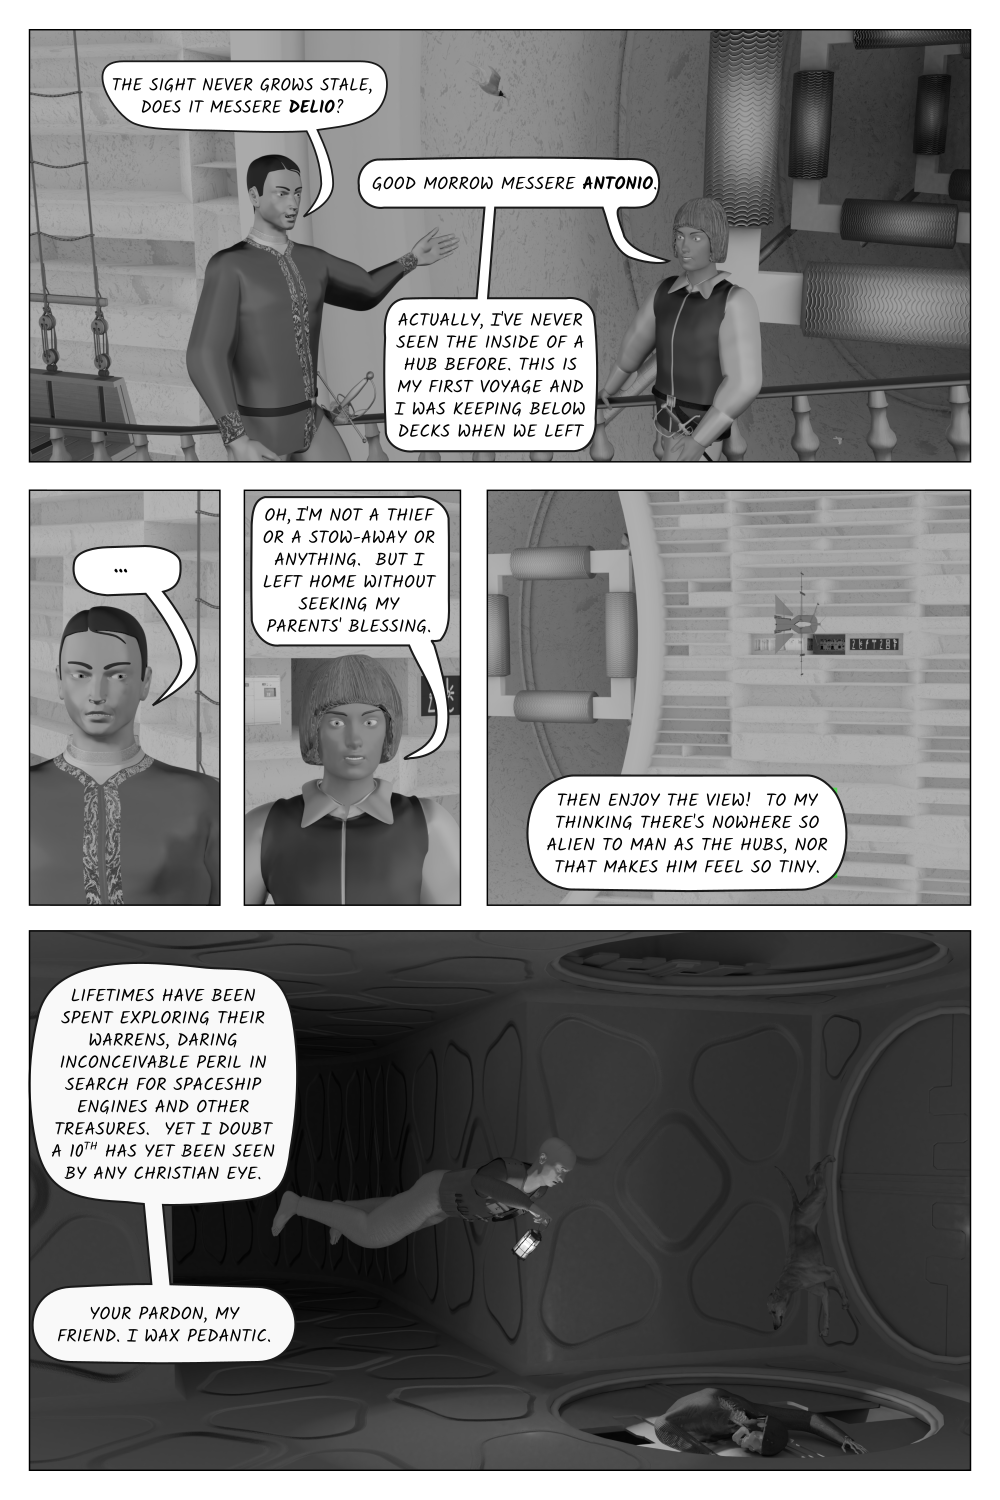 Poison Fruit - Page 33 - Delio tells Antonio that he ran away from home.  Antonio tells how 
    mysterious and dangerous the hubs of the space habitats are.